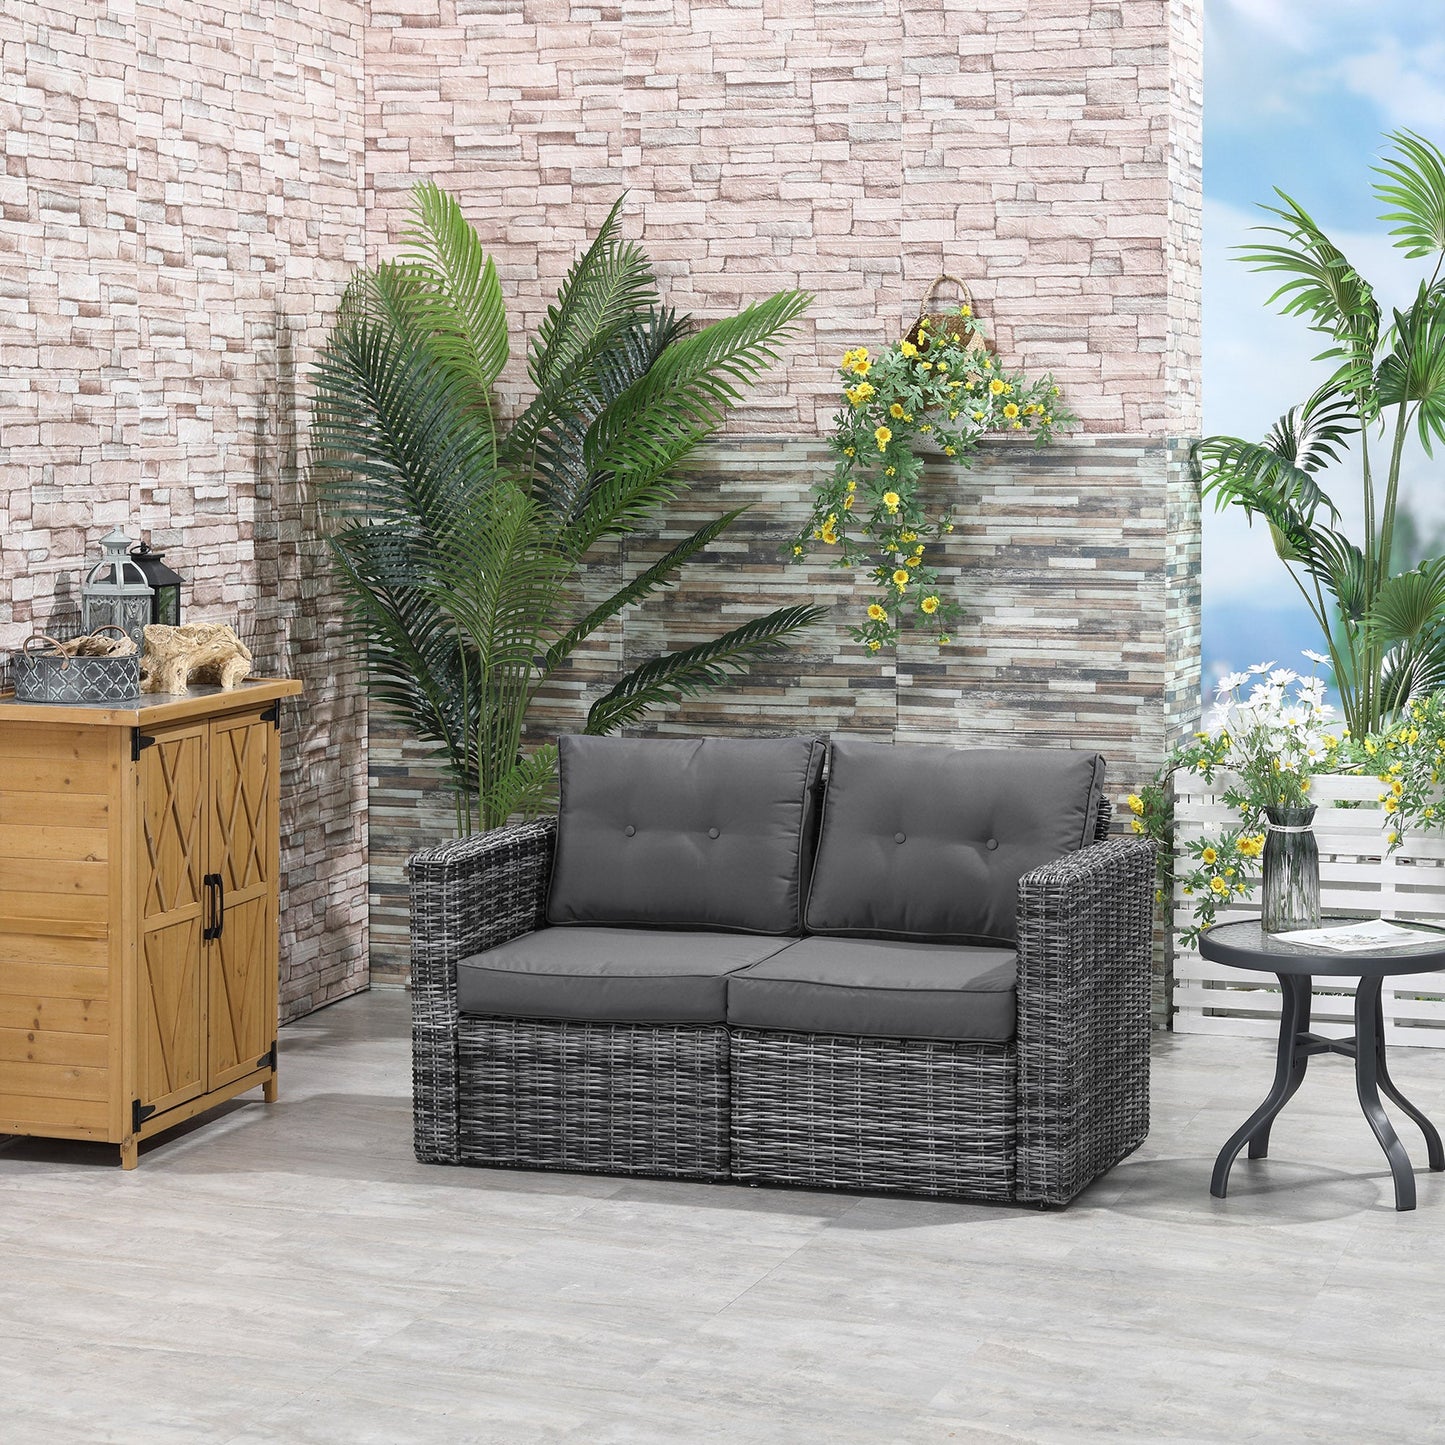 Outdoor and Garden-2 Piece Patio Wicker Corner Sofa Set, Outdoor PE Rattan Furniture, with Curved Armrests and Padded Cushions for Balcony, Lawn, Grey - Outdoor Style Company